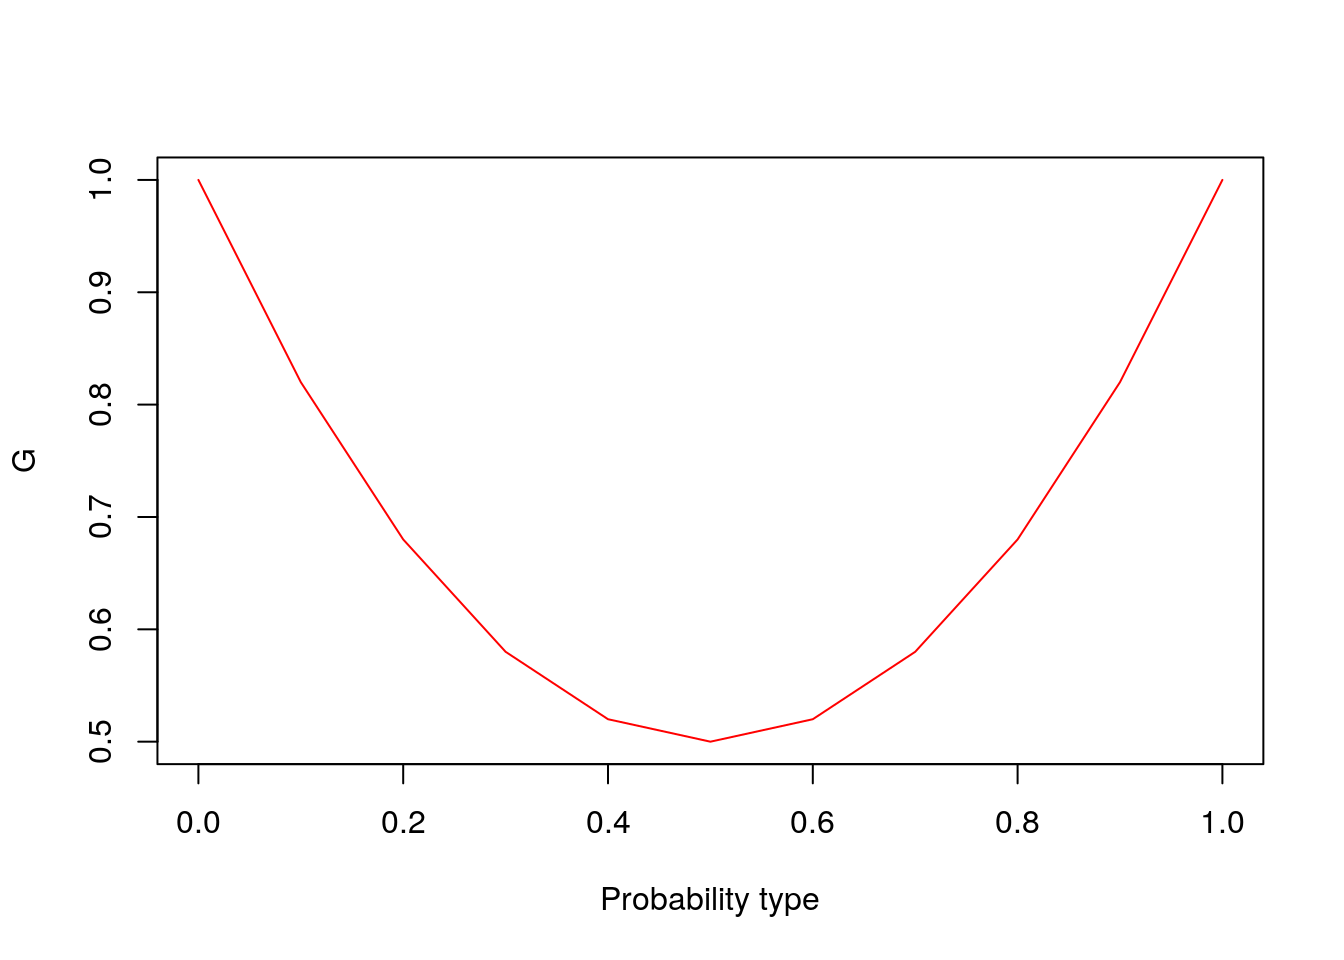 Probability of being the same type